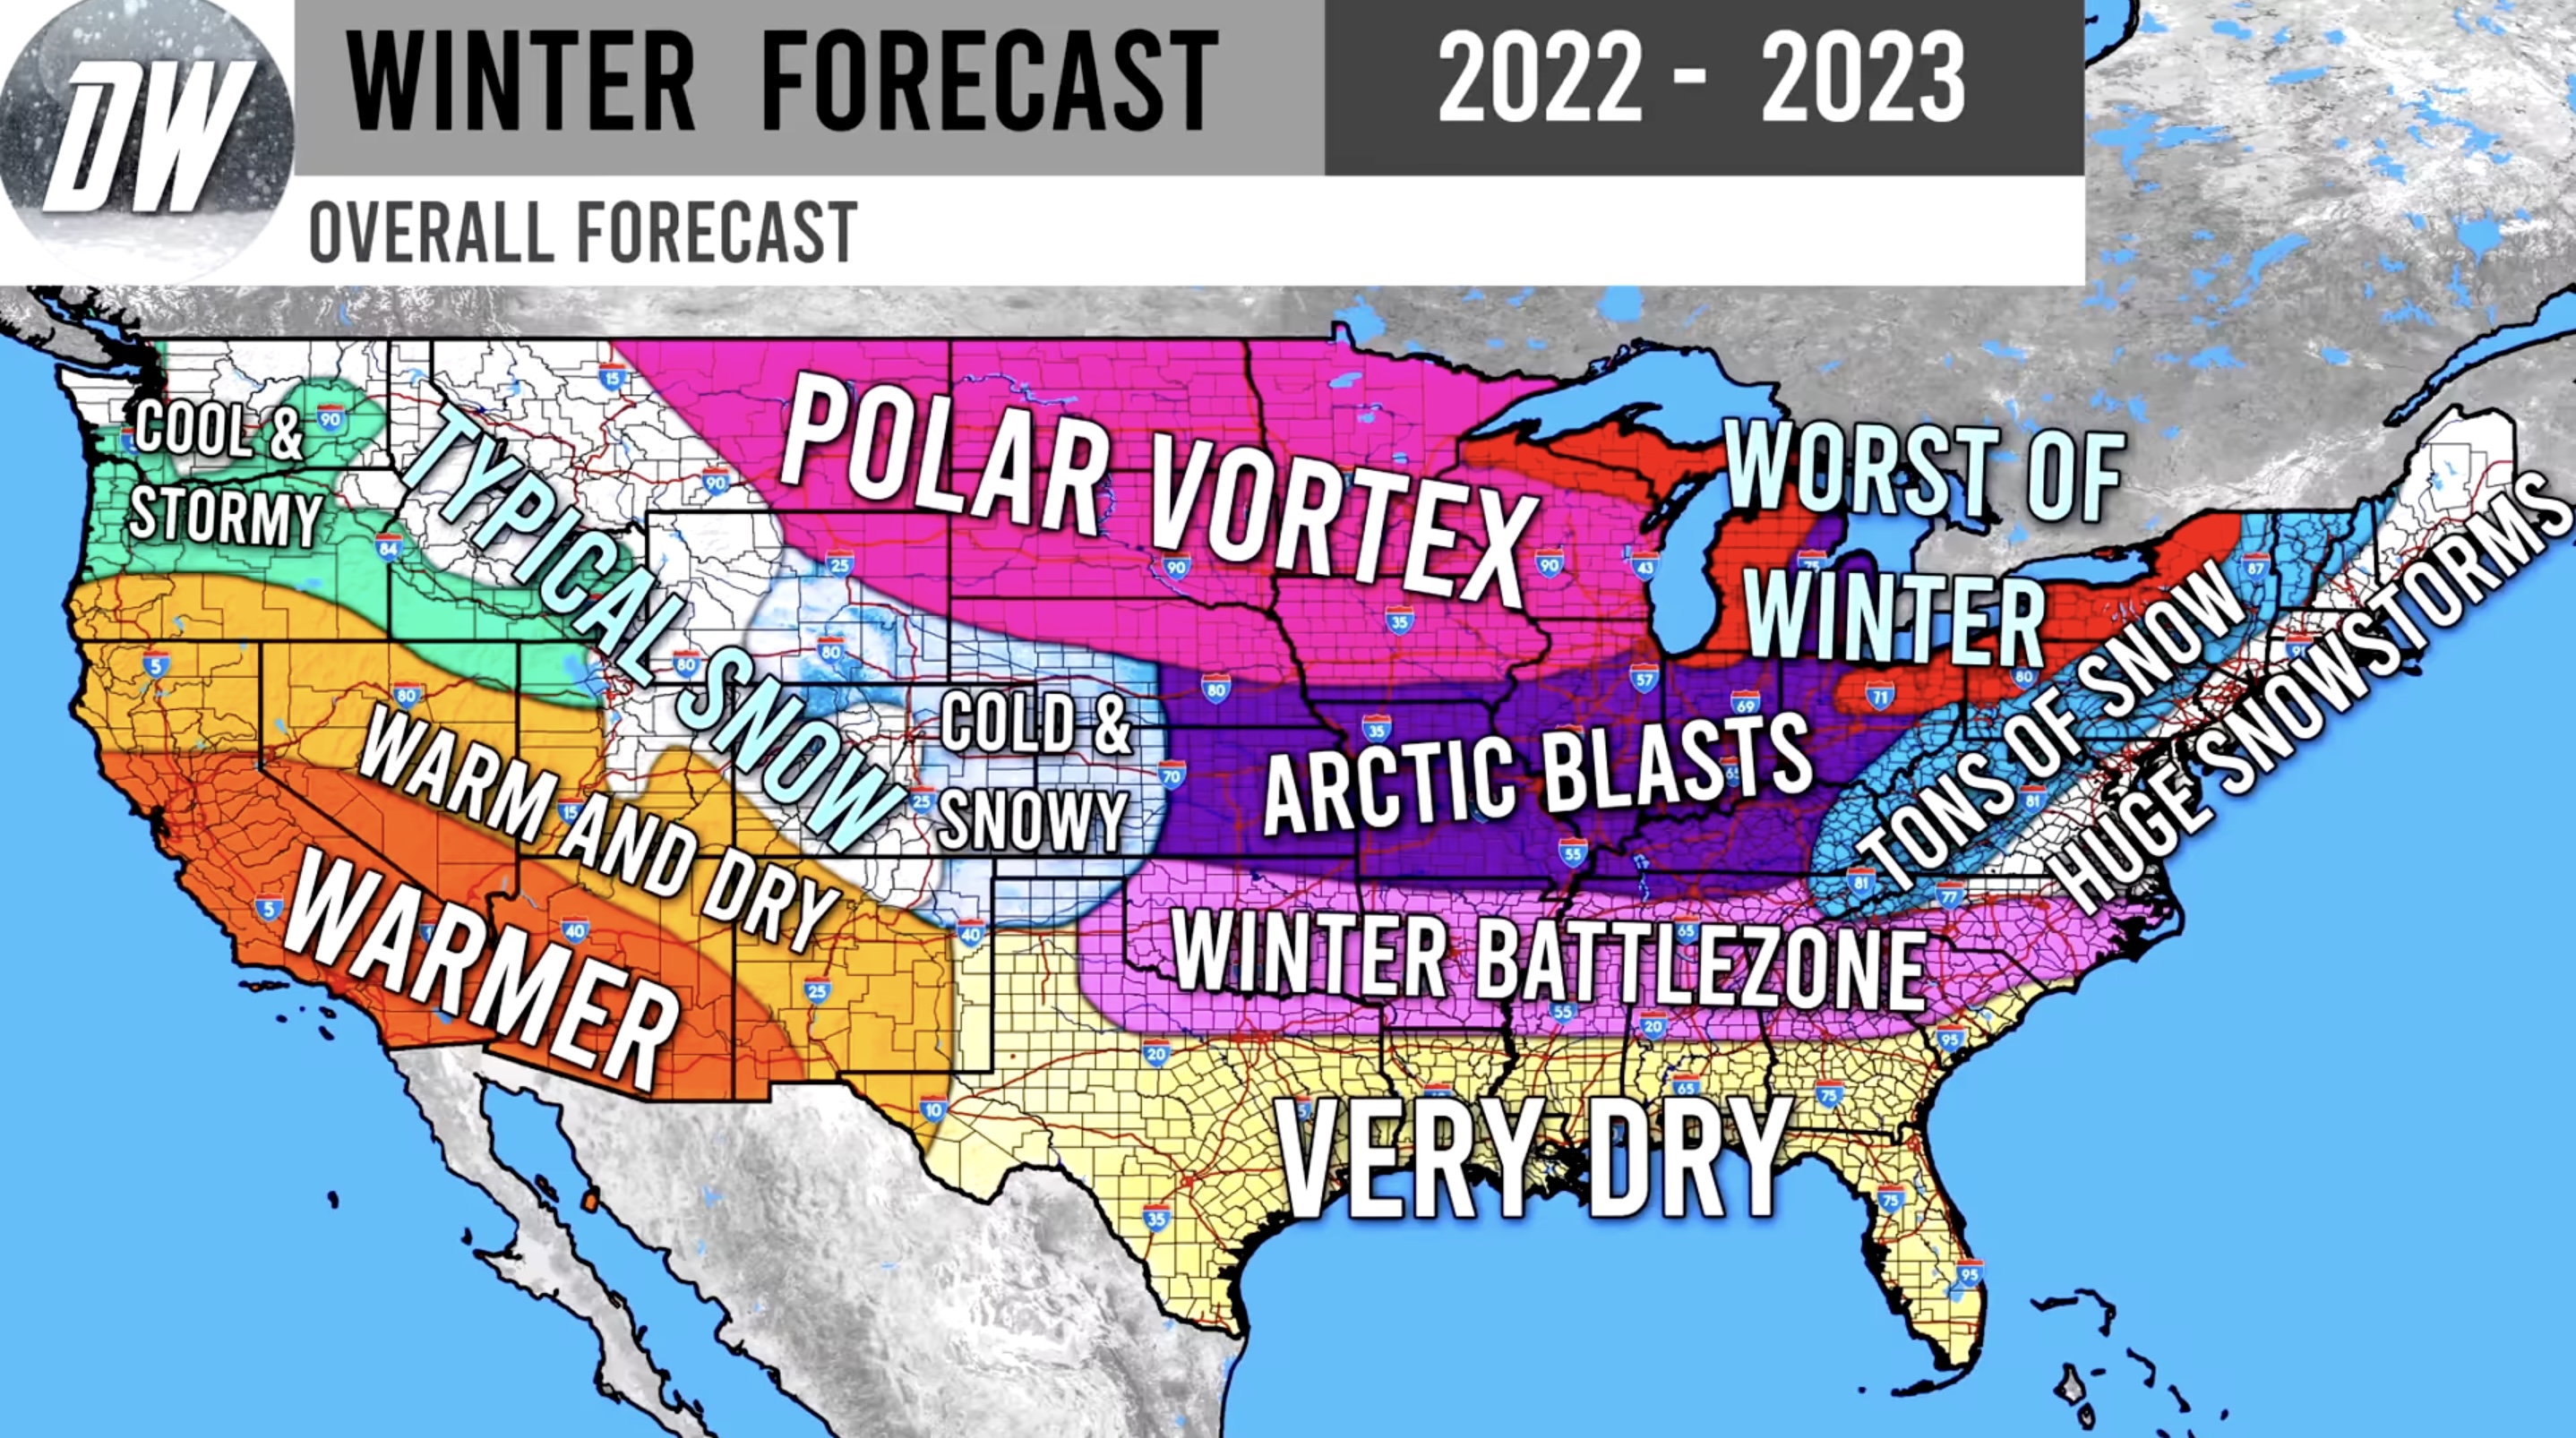 Winter Weather Forecast For 2022 2023 ?resize=640